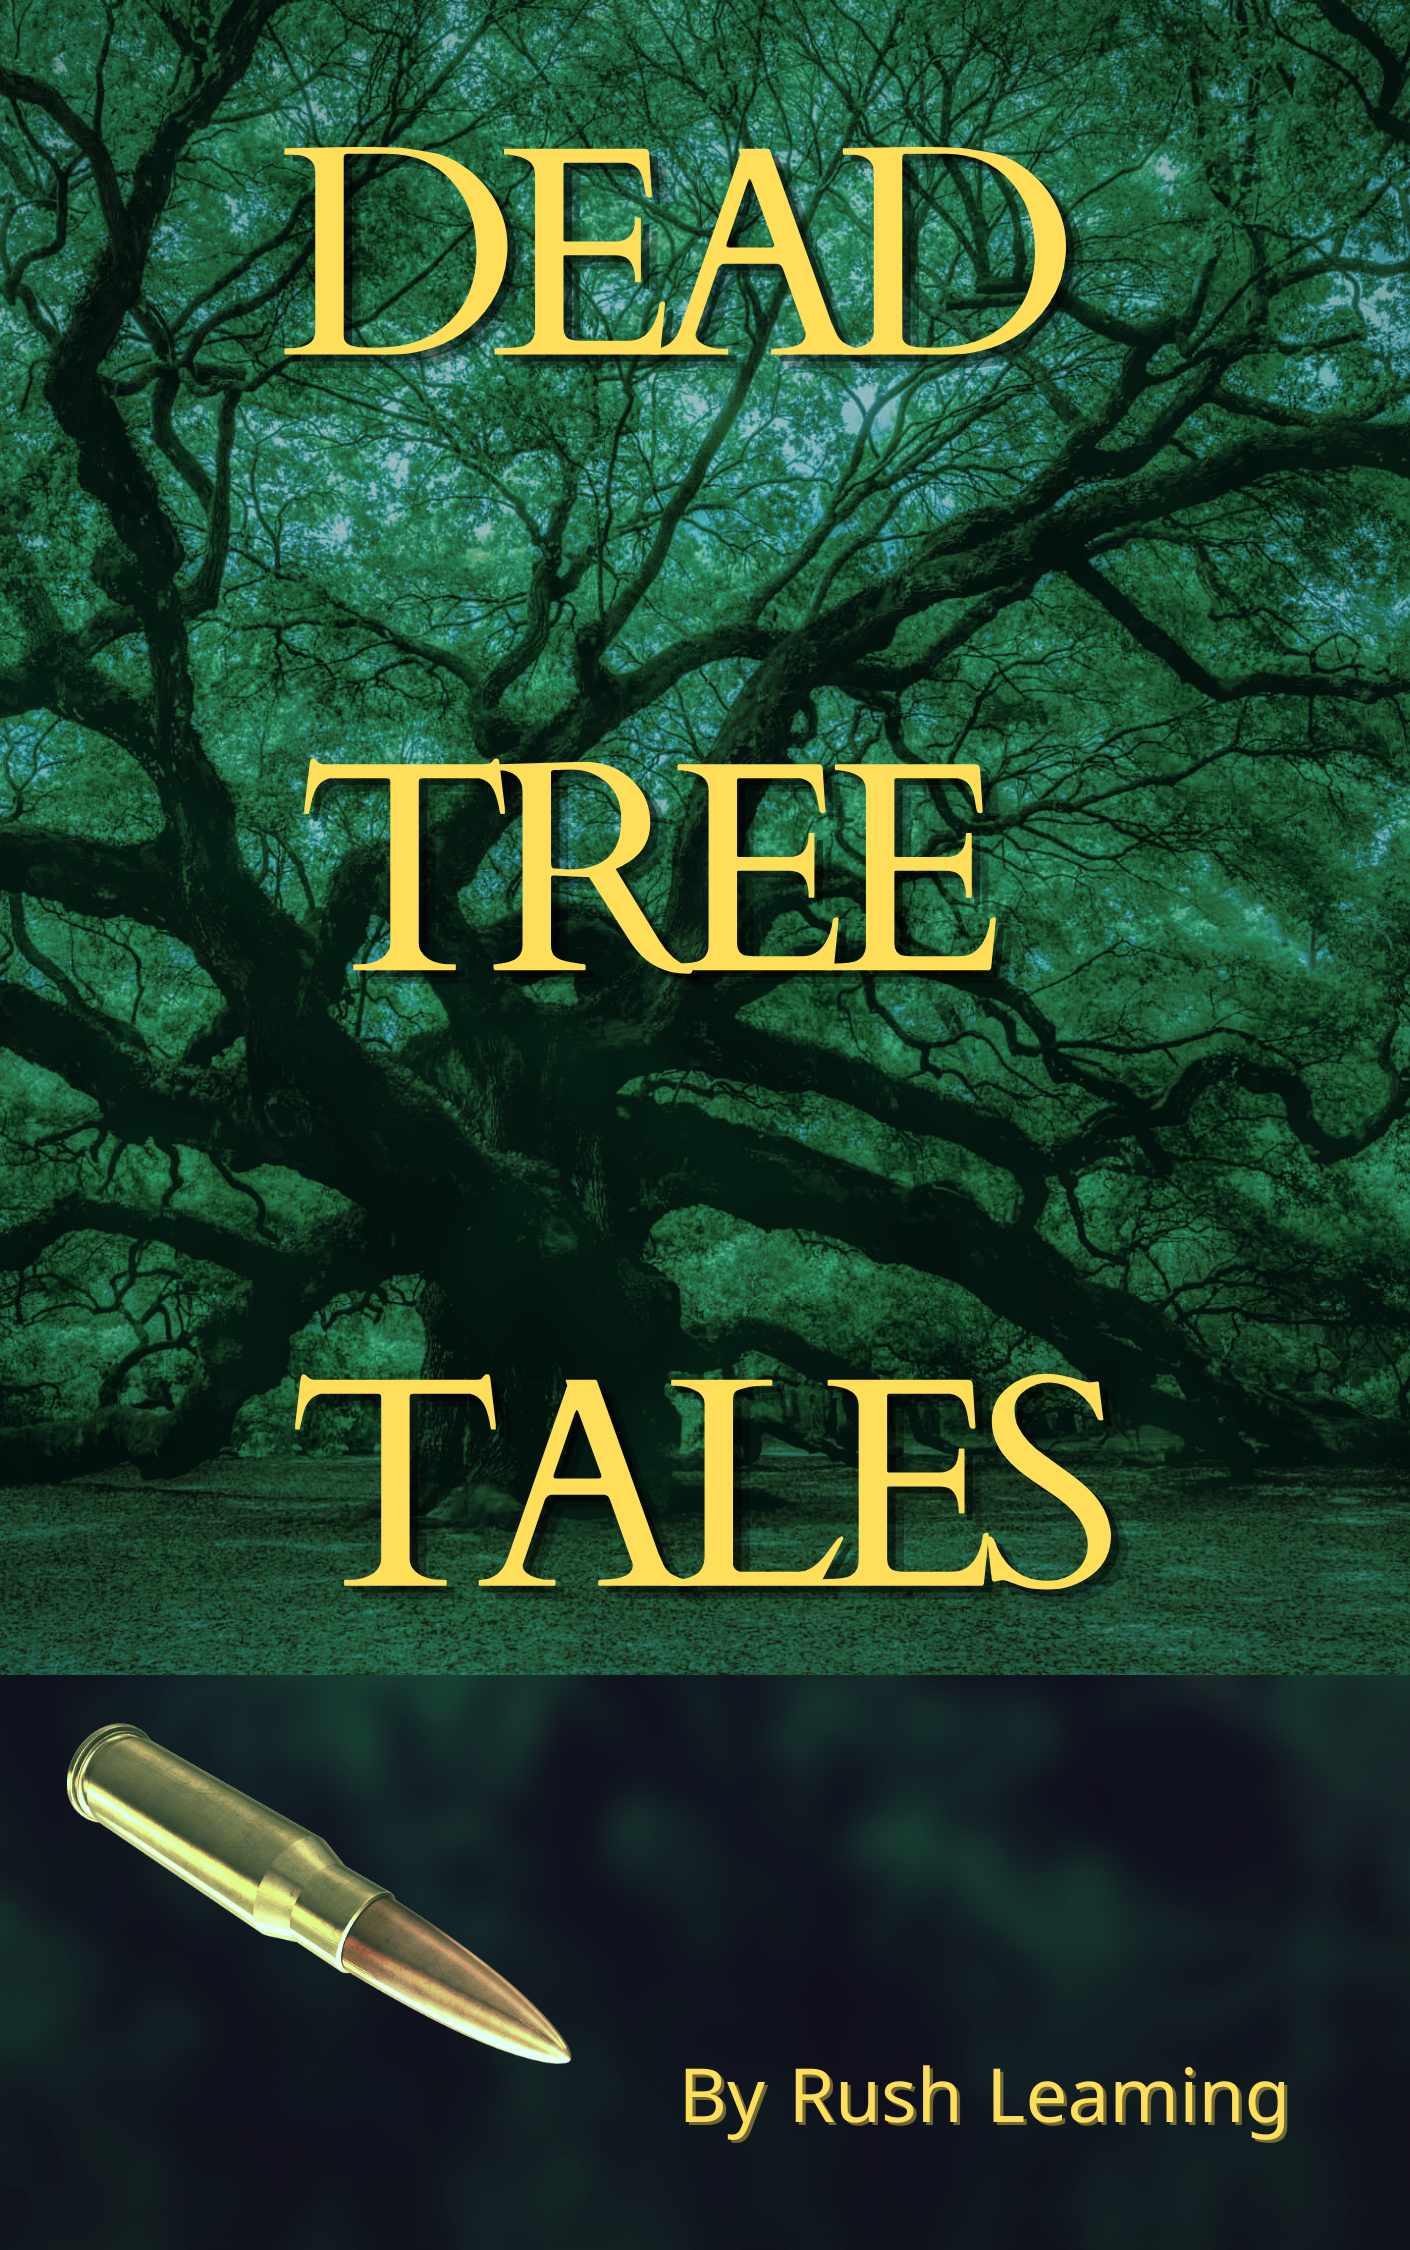 Dead Tree Tales by Rush Leaming